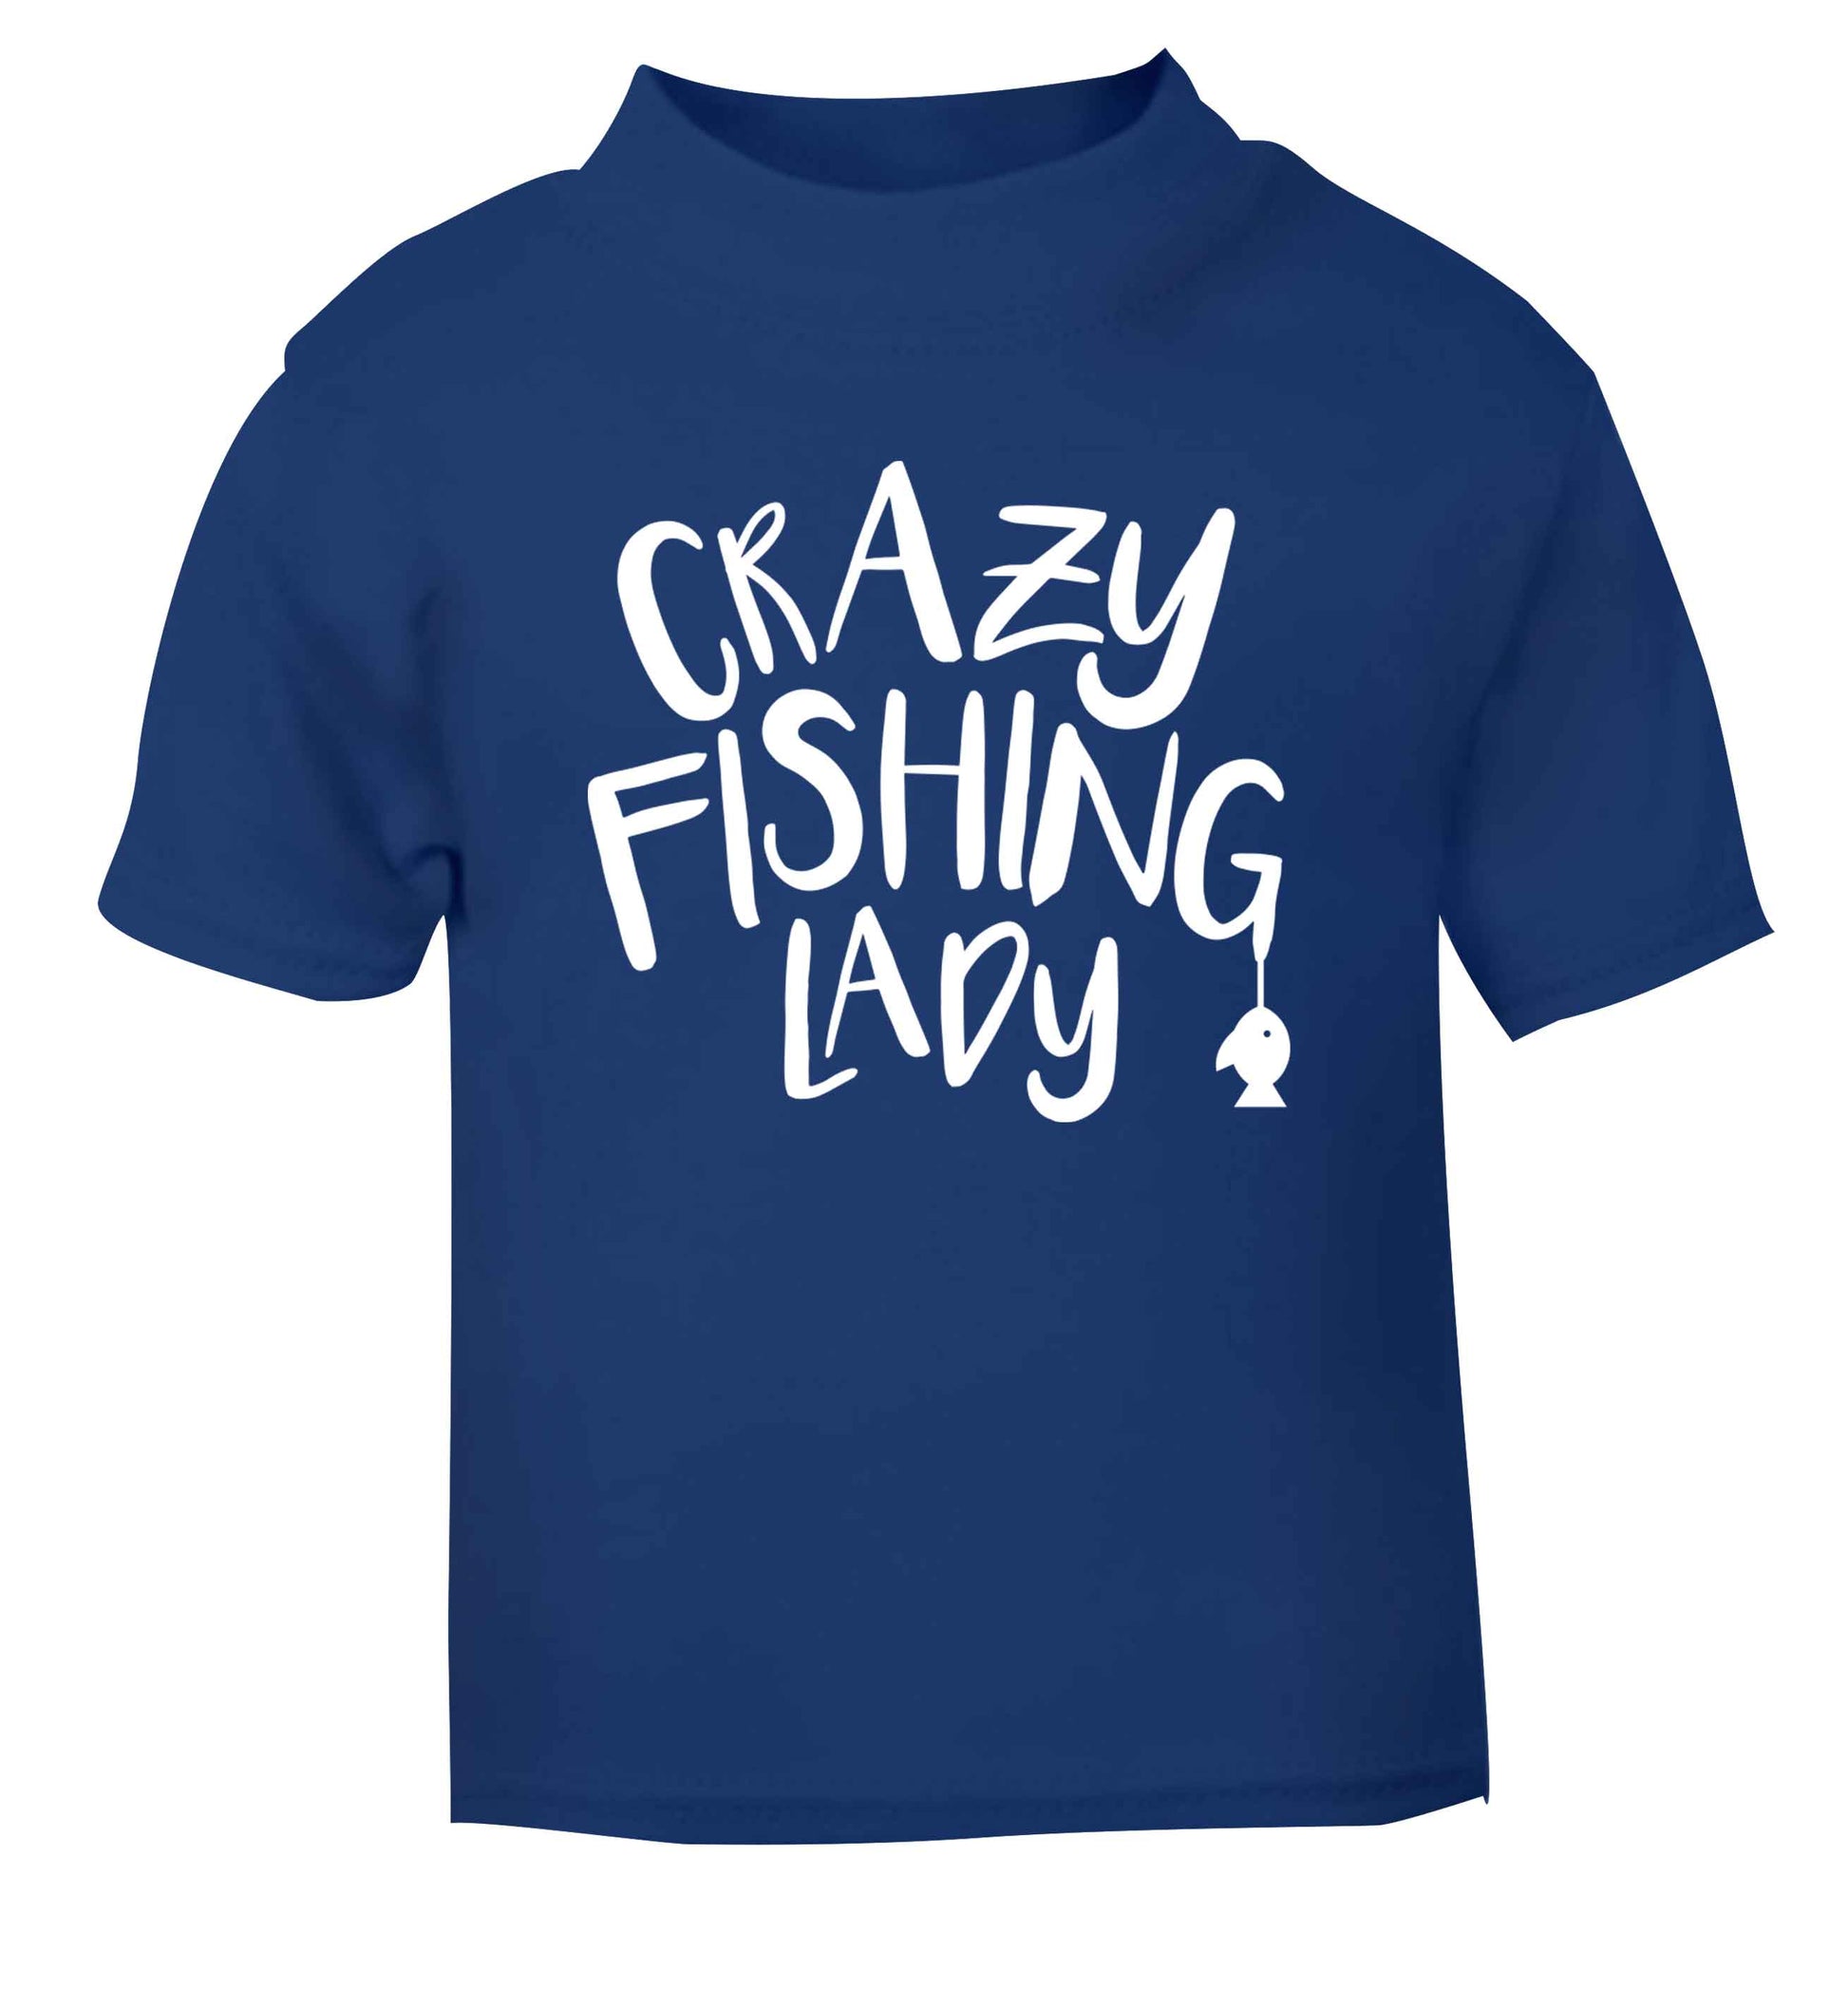 Crazy fishing lady blue Baby Toddler Tshirt 2 Years